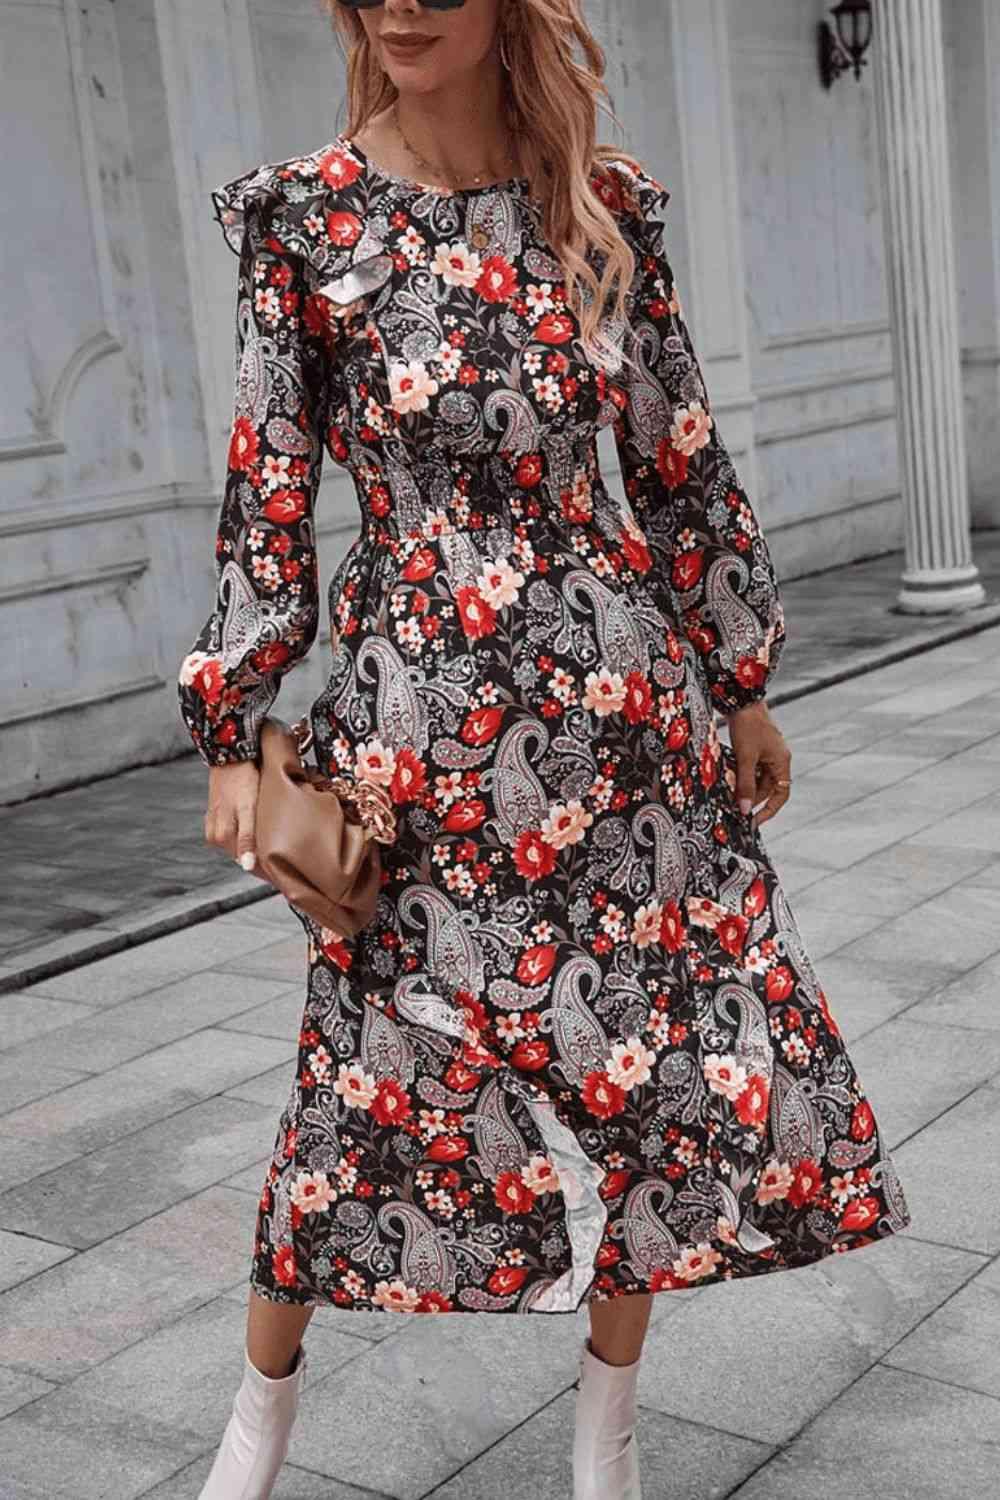 a woman wearing a black and red floral print dress